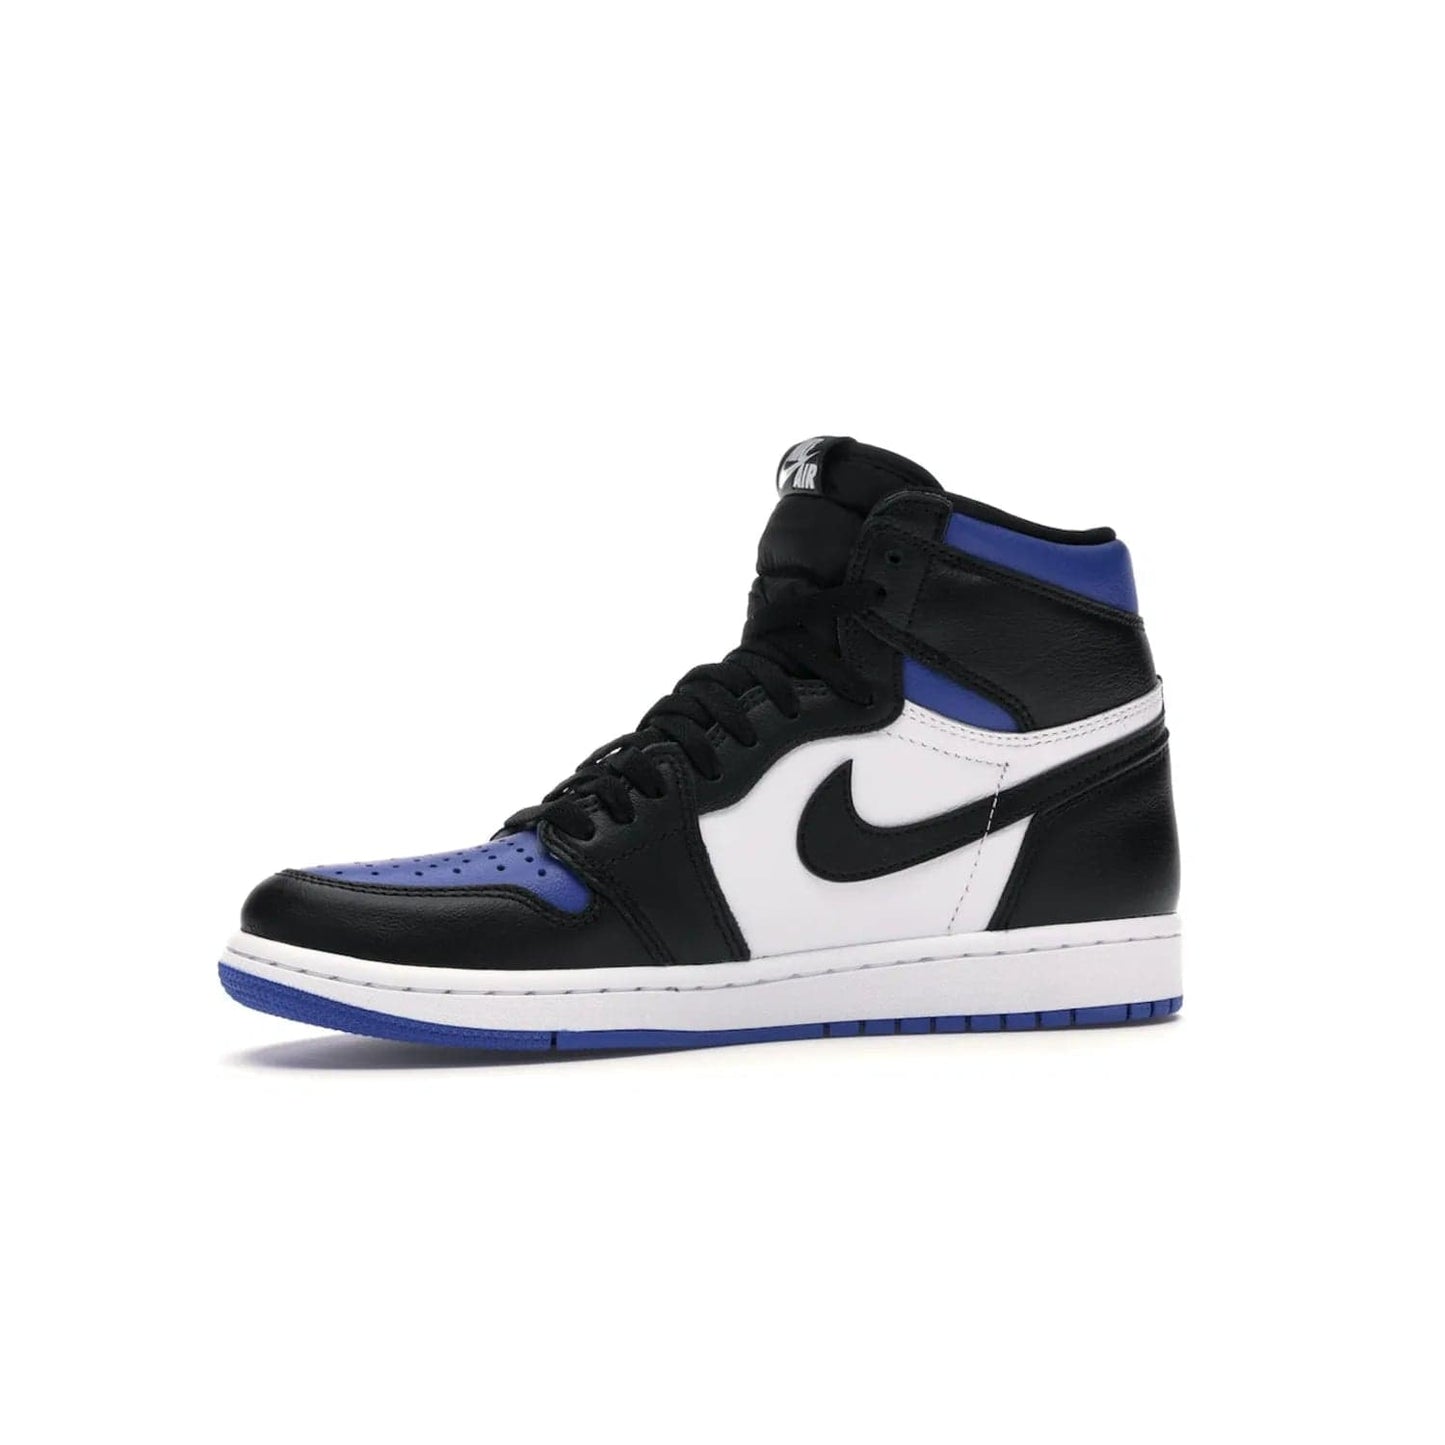 Jordan 1 Retro High Royal Toe - Image 17 - Only at www.BallersClubKickz.com - Refresh your look with the Jordan 1 Retro High Royal Toe. This classic AJ 1 sports a white and royal leather upper, black leather overlays, and branded leather tongue tag. Pick up today and set the streets ablaze.